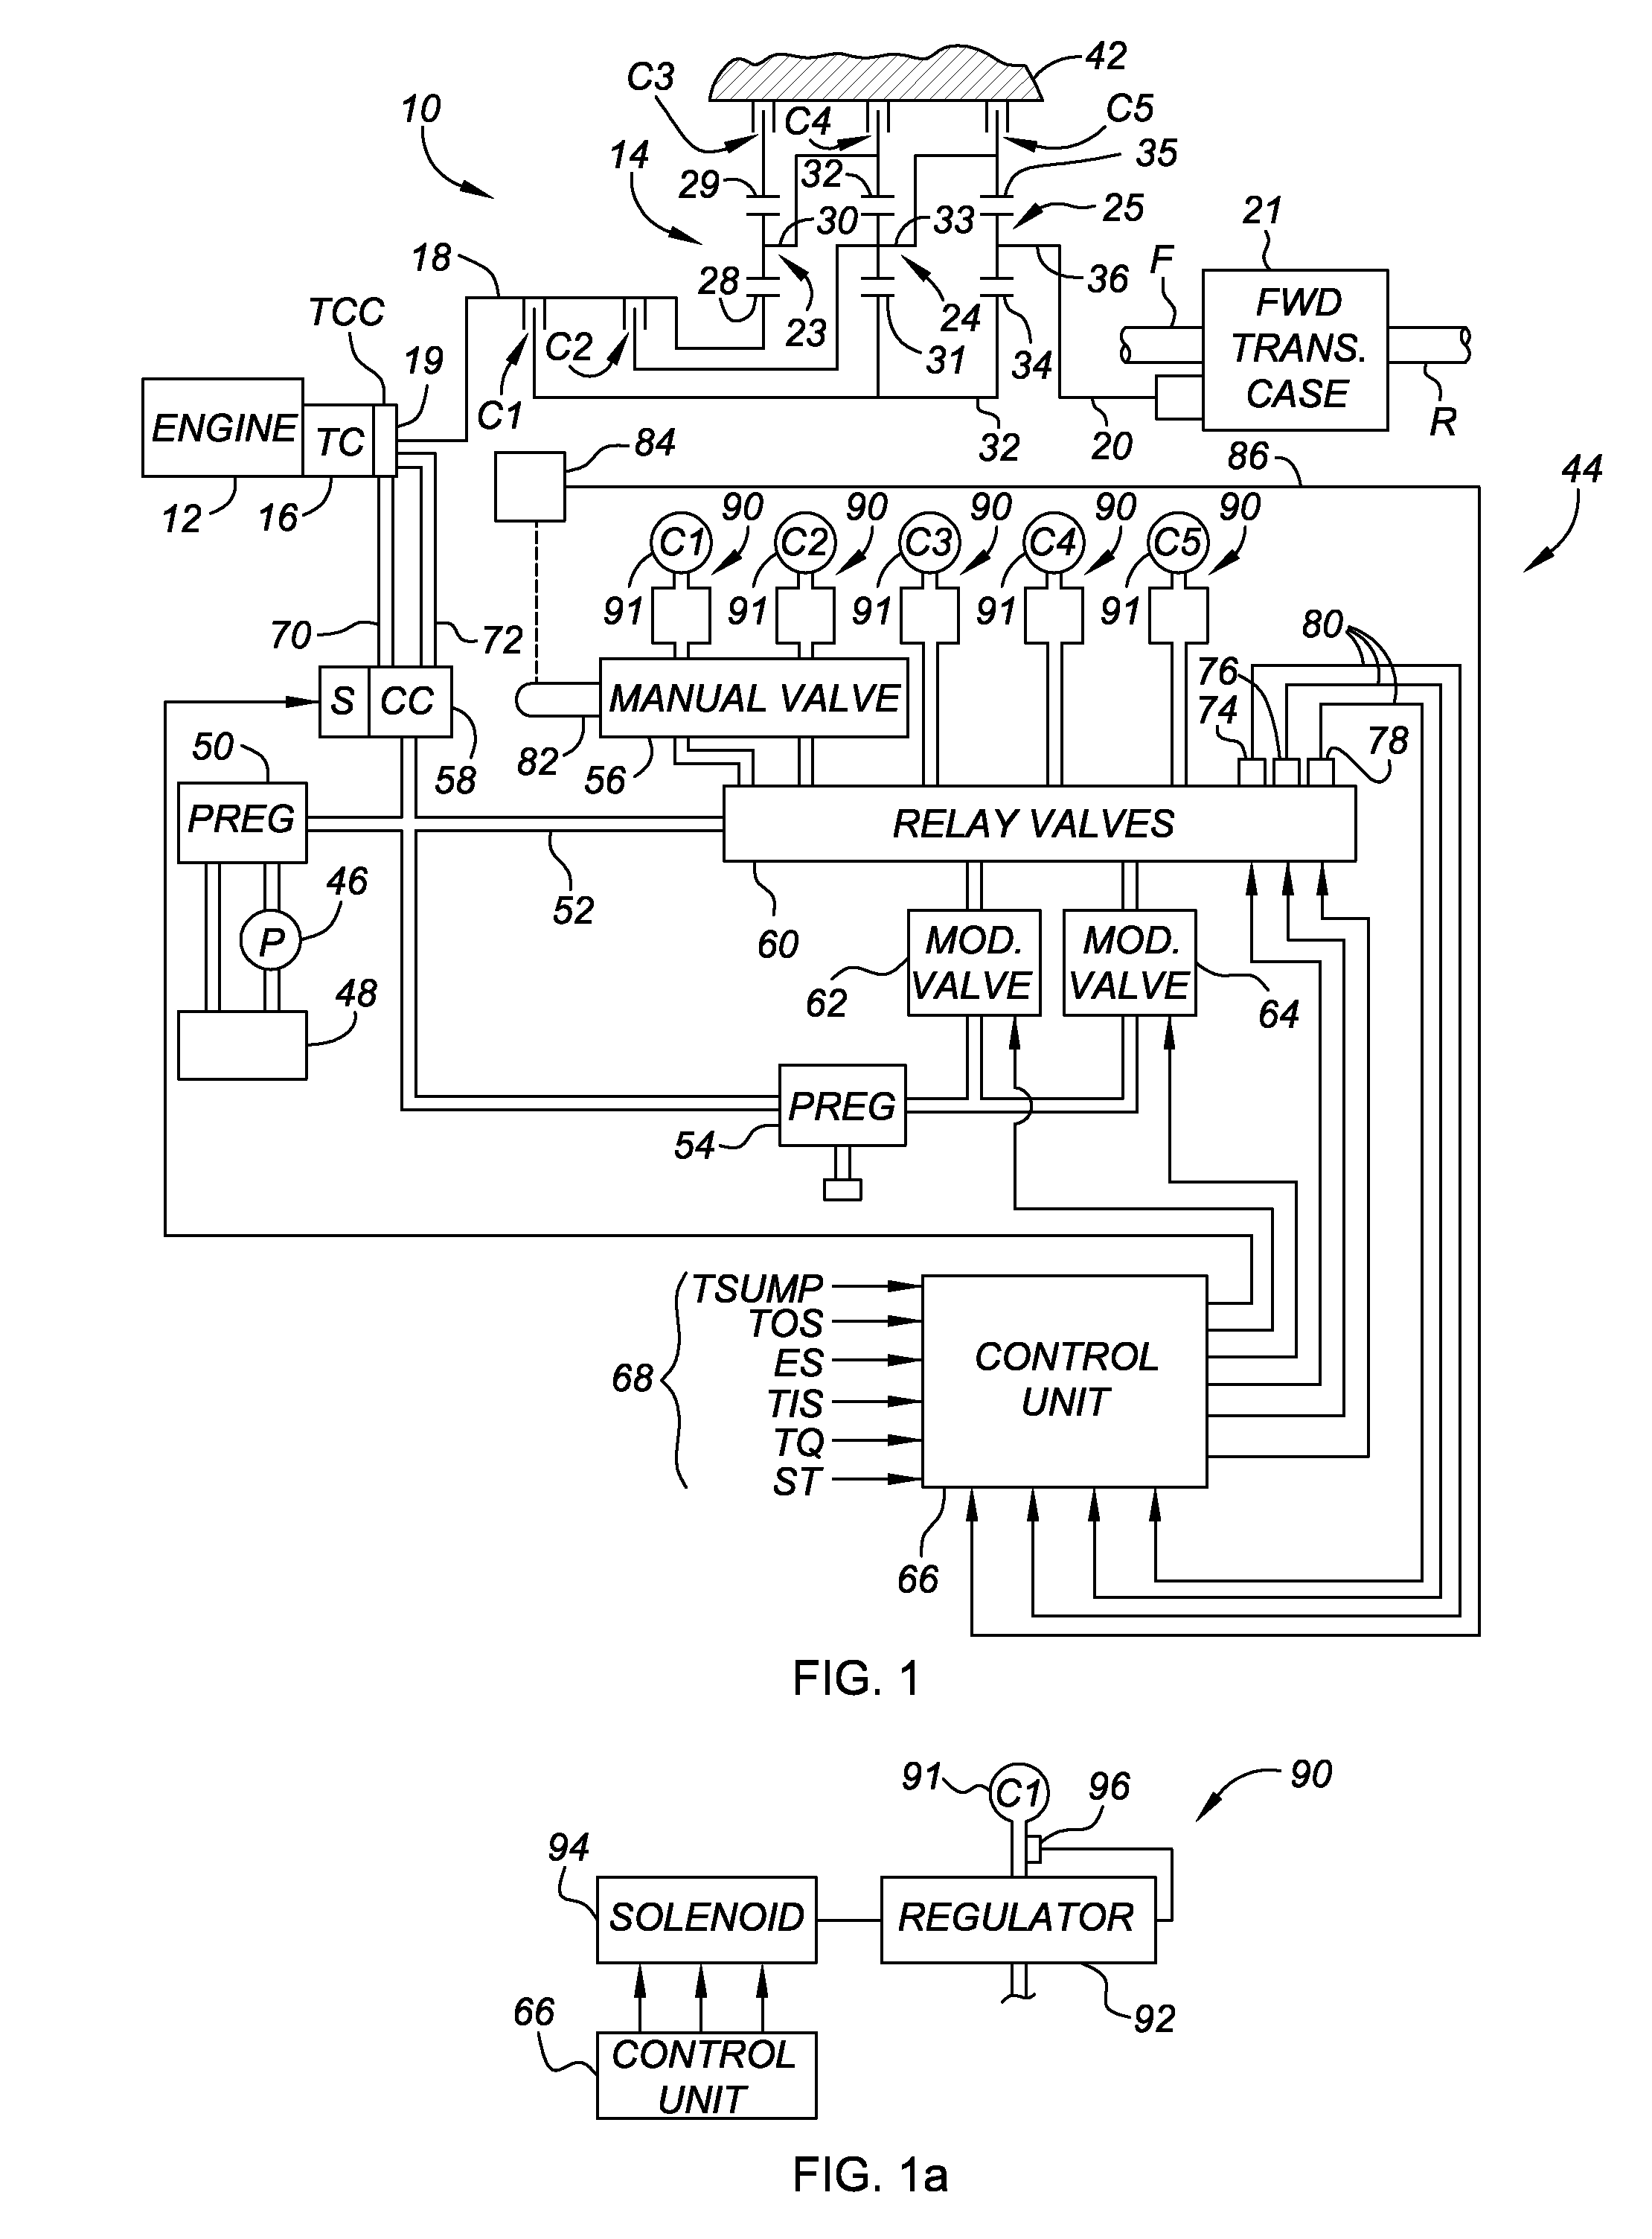 Apparatus and method for decreasing an upshift delay in an automatic transmission